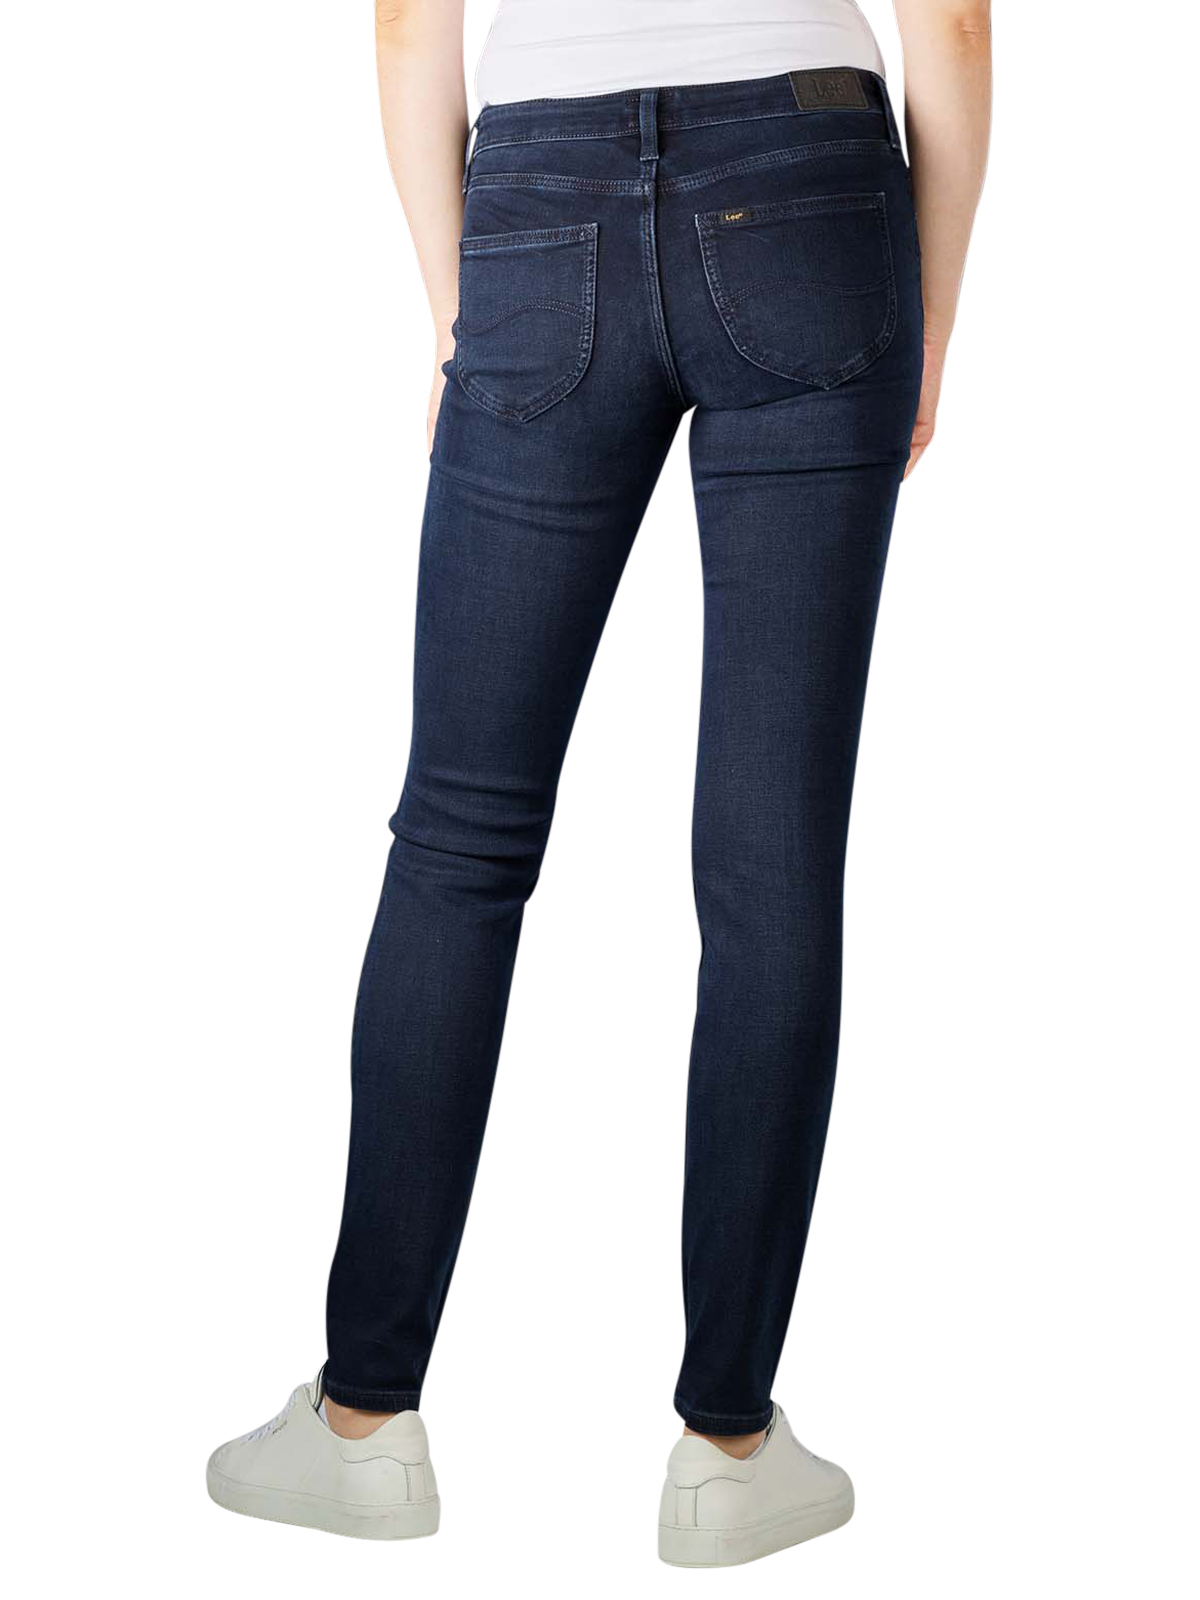 Activate vitality Piping Lee Scarlett Jeans Skinny dark lea Lee Women's Jeans | Free Shipping on  BEBASIC.CH - SIMPLY LOOK GOOD